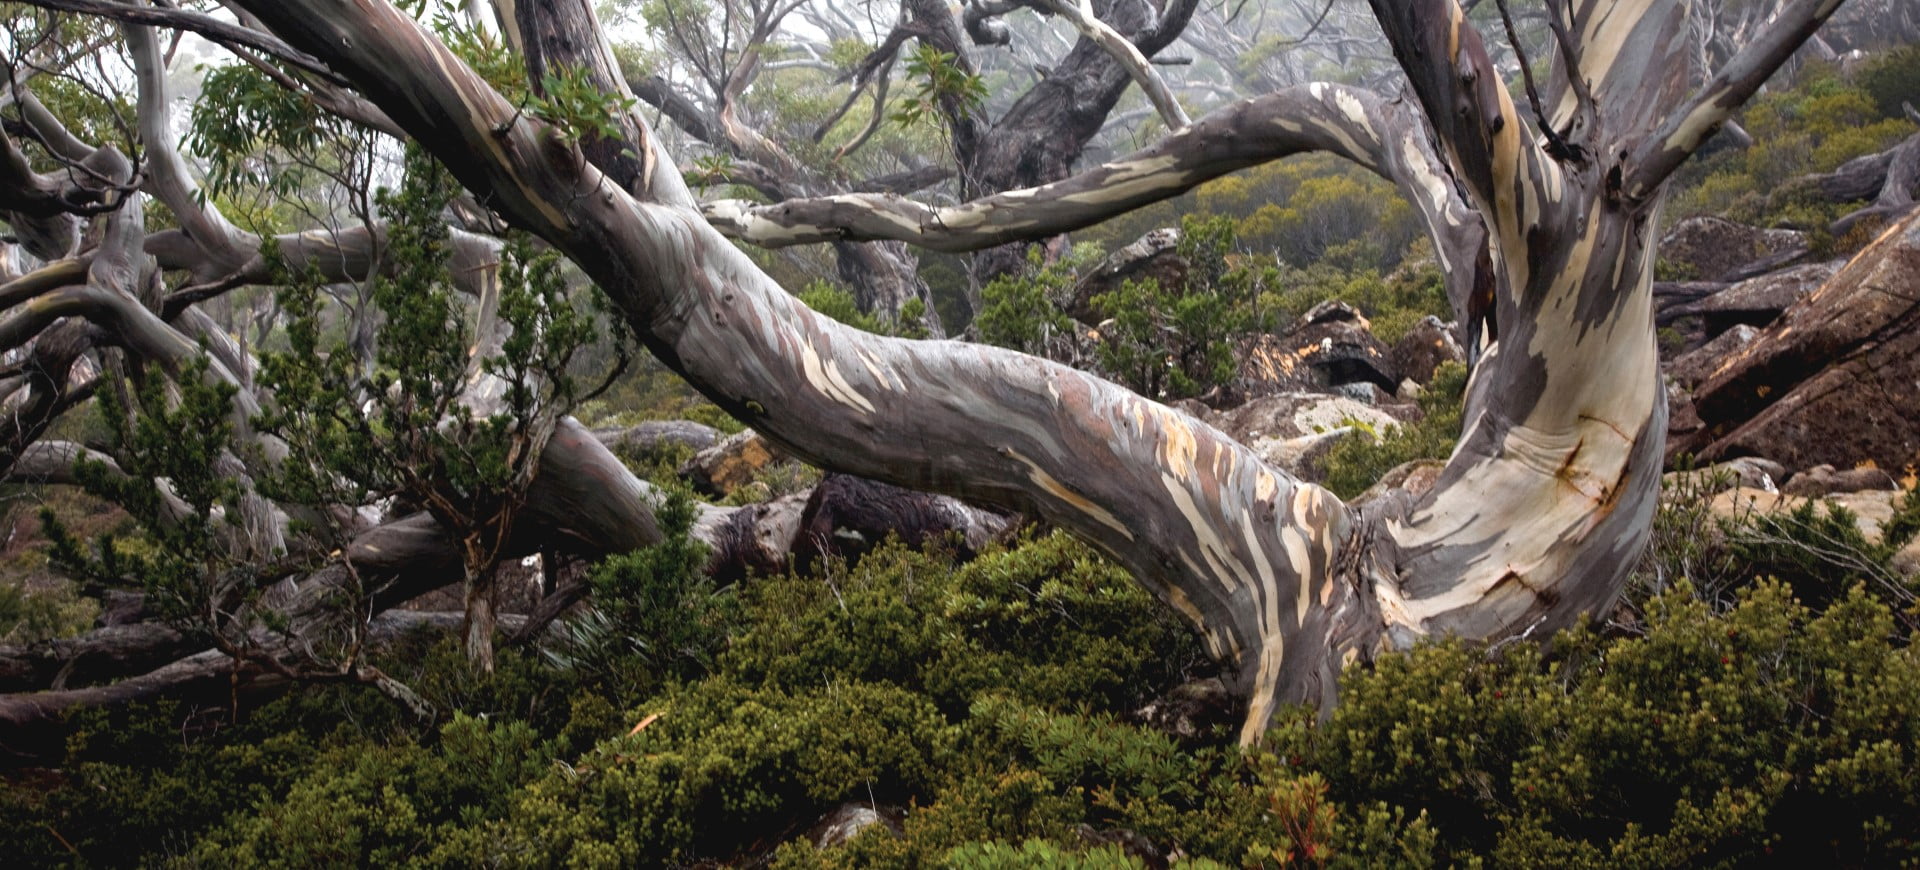 Snow gum (Eucalpytus coccifera) Twisted branches and many shades of bark.